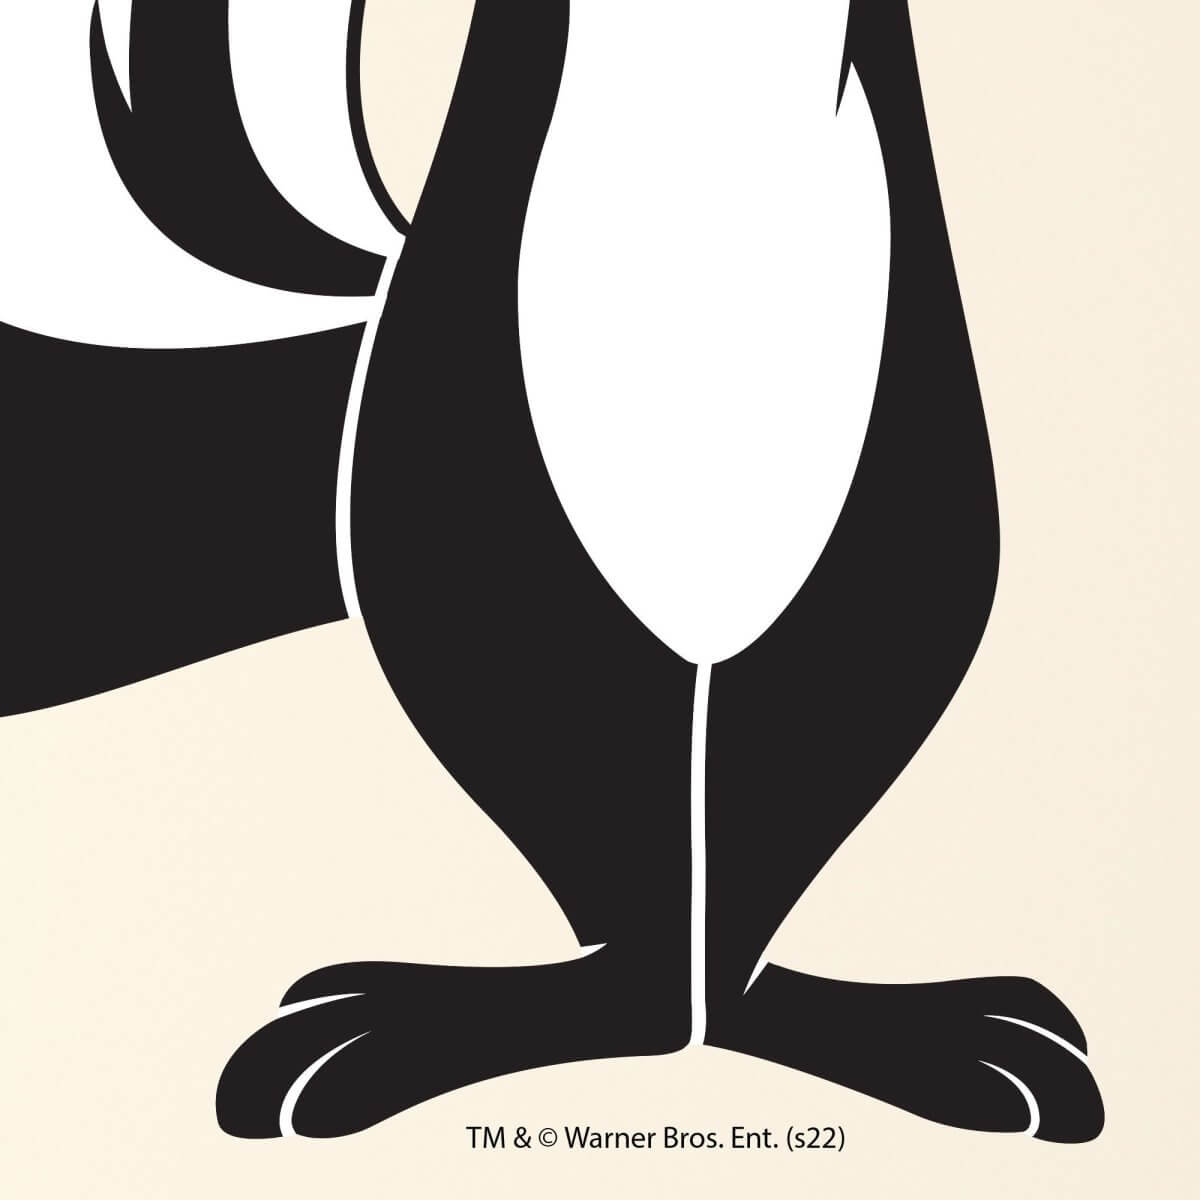 Kismet Decals Looney Tunes Pepe Le Pew Licensed Wall Sticker - Easy DIY Home & Kids Room Decor Wall Decal Art - Kismet Decals